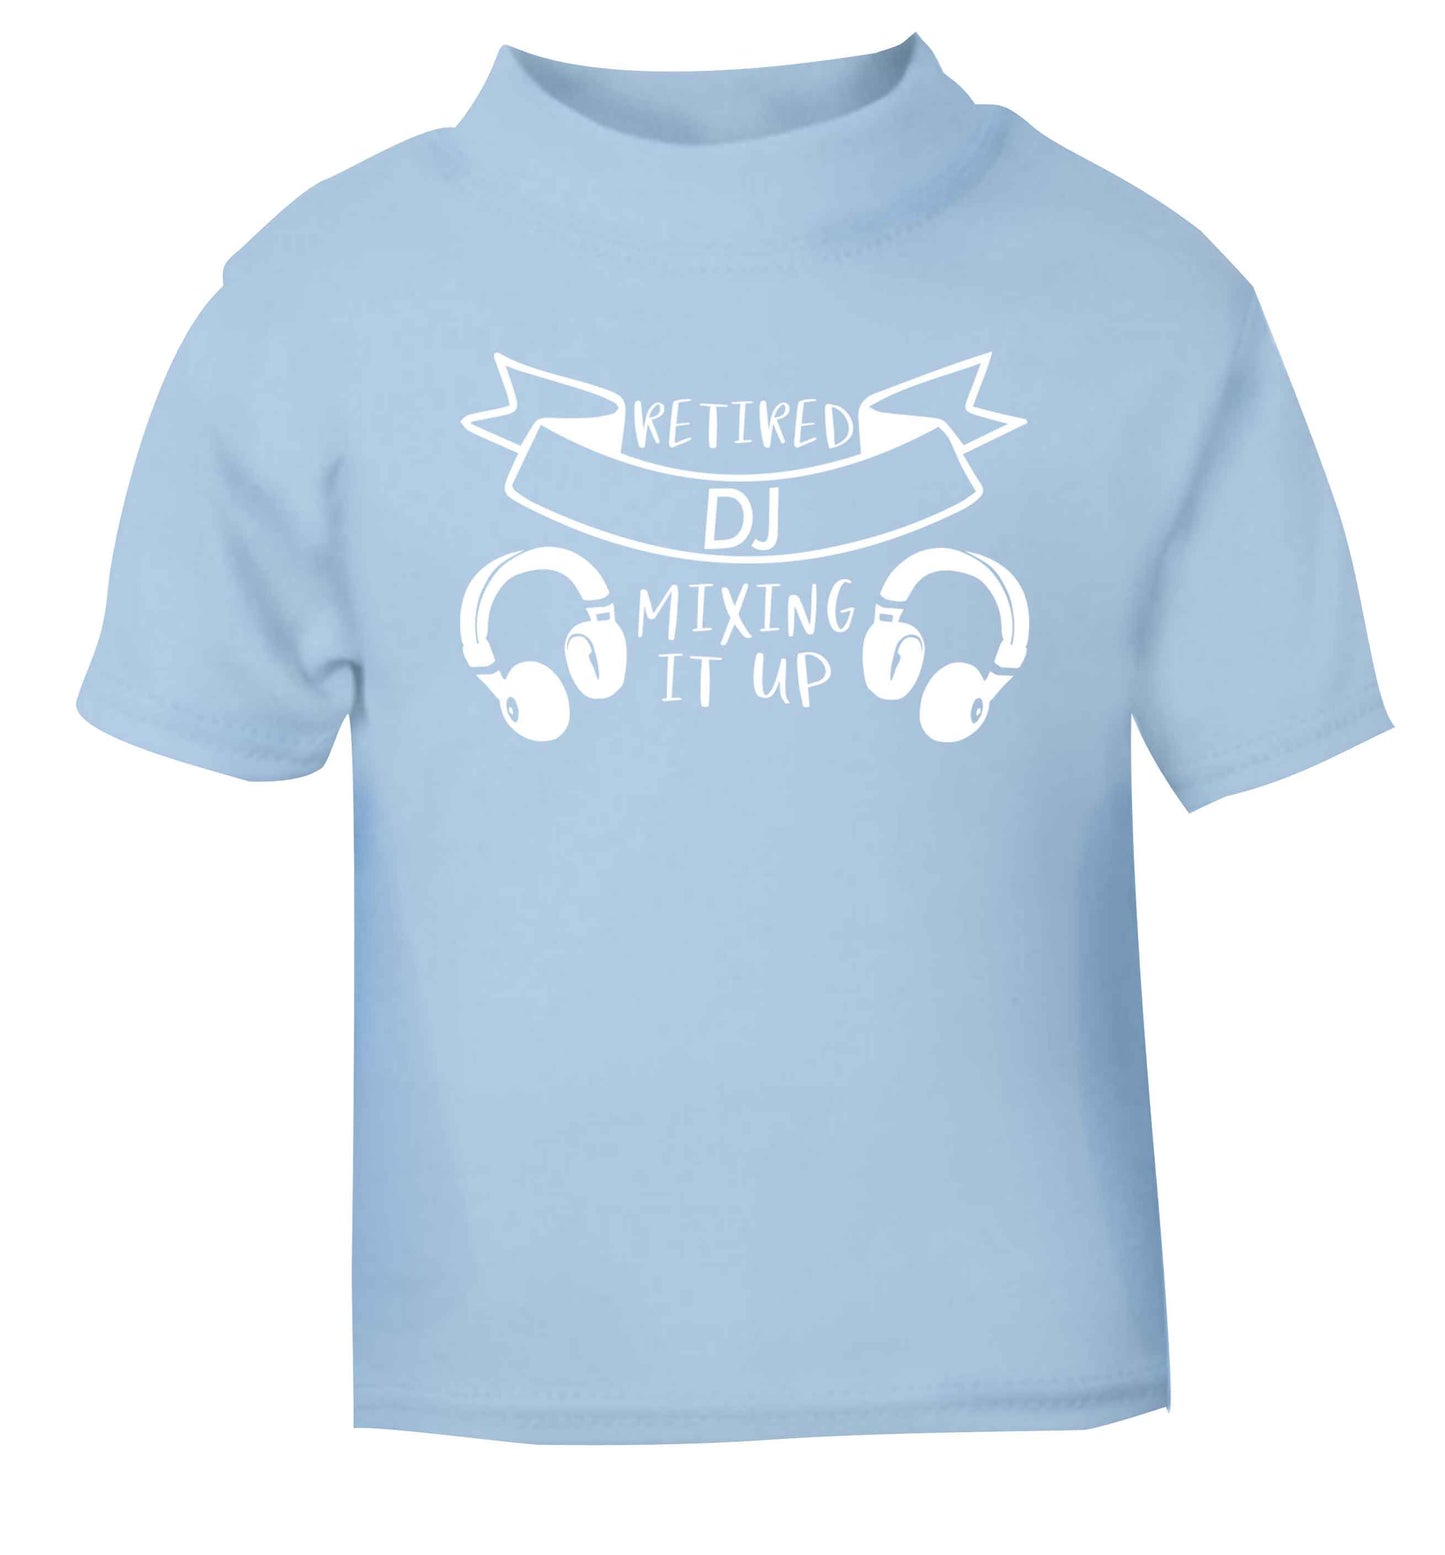 Retired DJ mixing it up light blue Baby Toddler Tshirt 2 Years